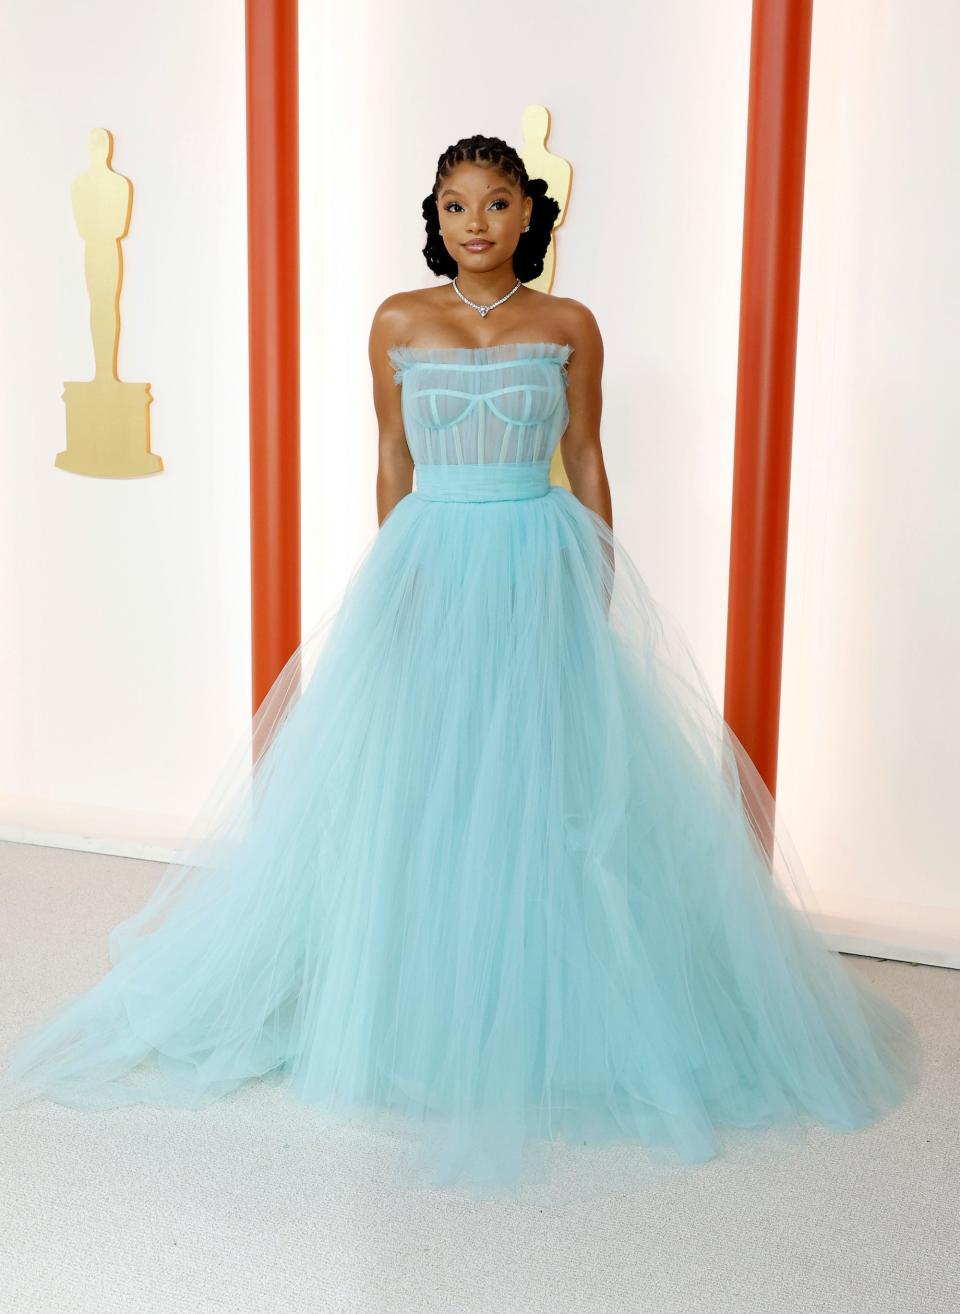 Halle Bailey attends the 2023 Academy Awards.